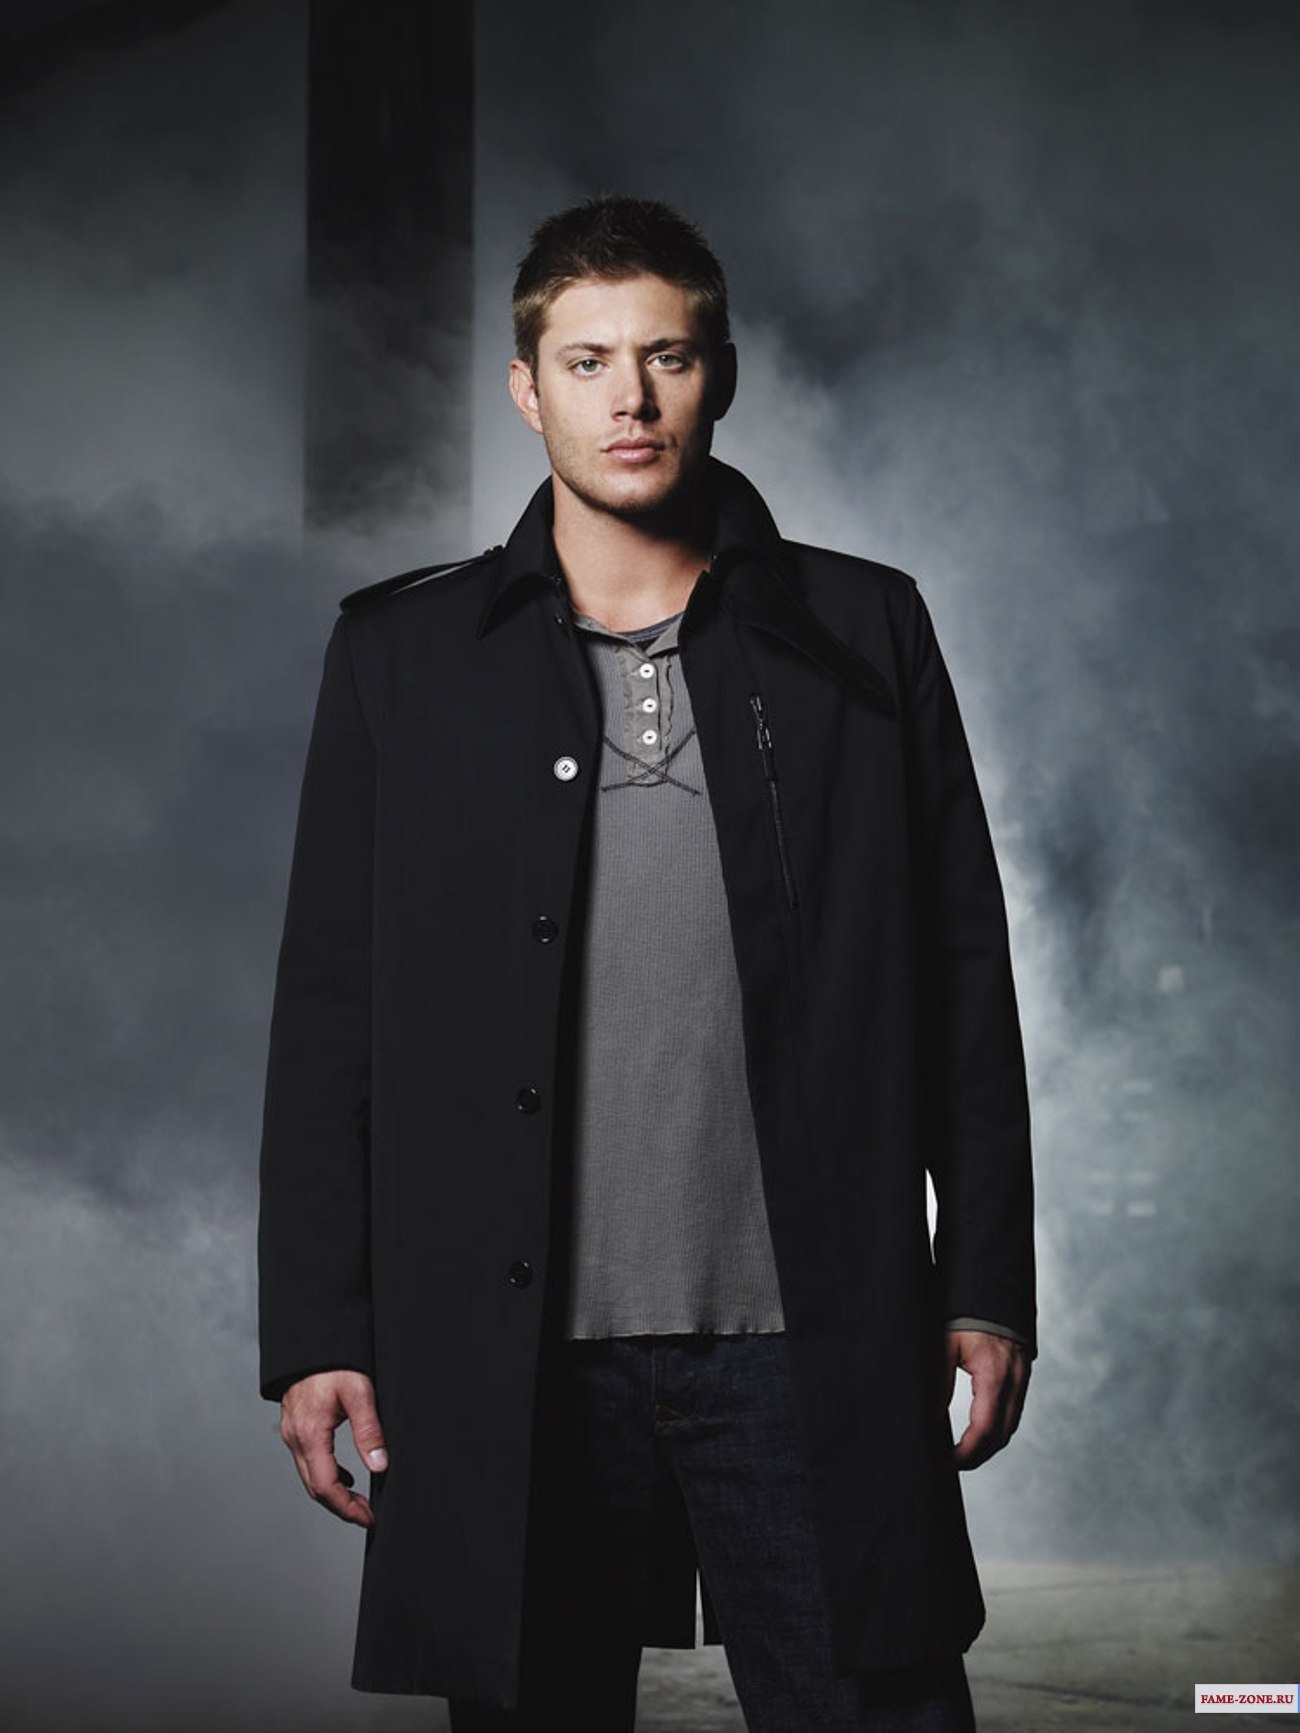 Jensen Ackles Cell Phone Wallpapers